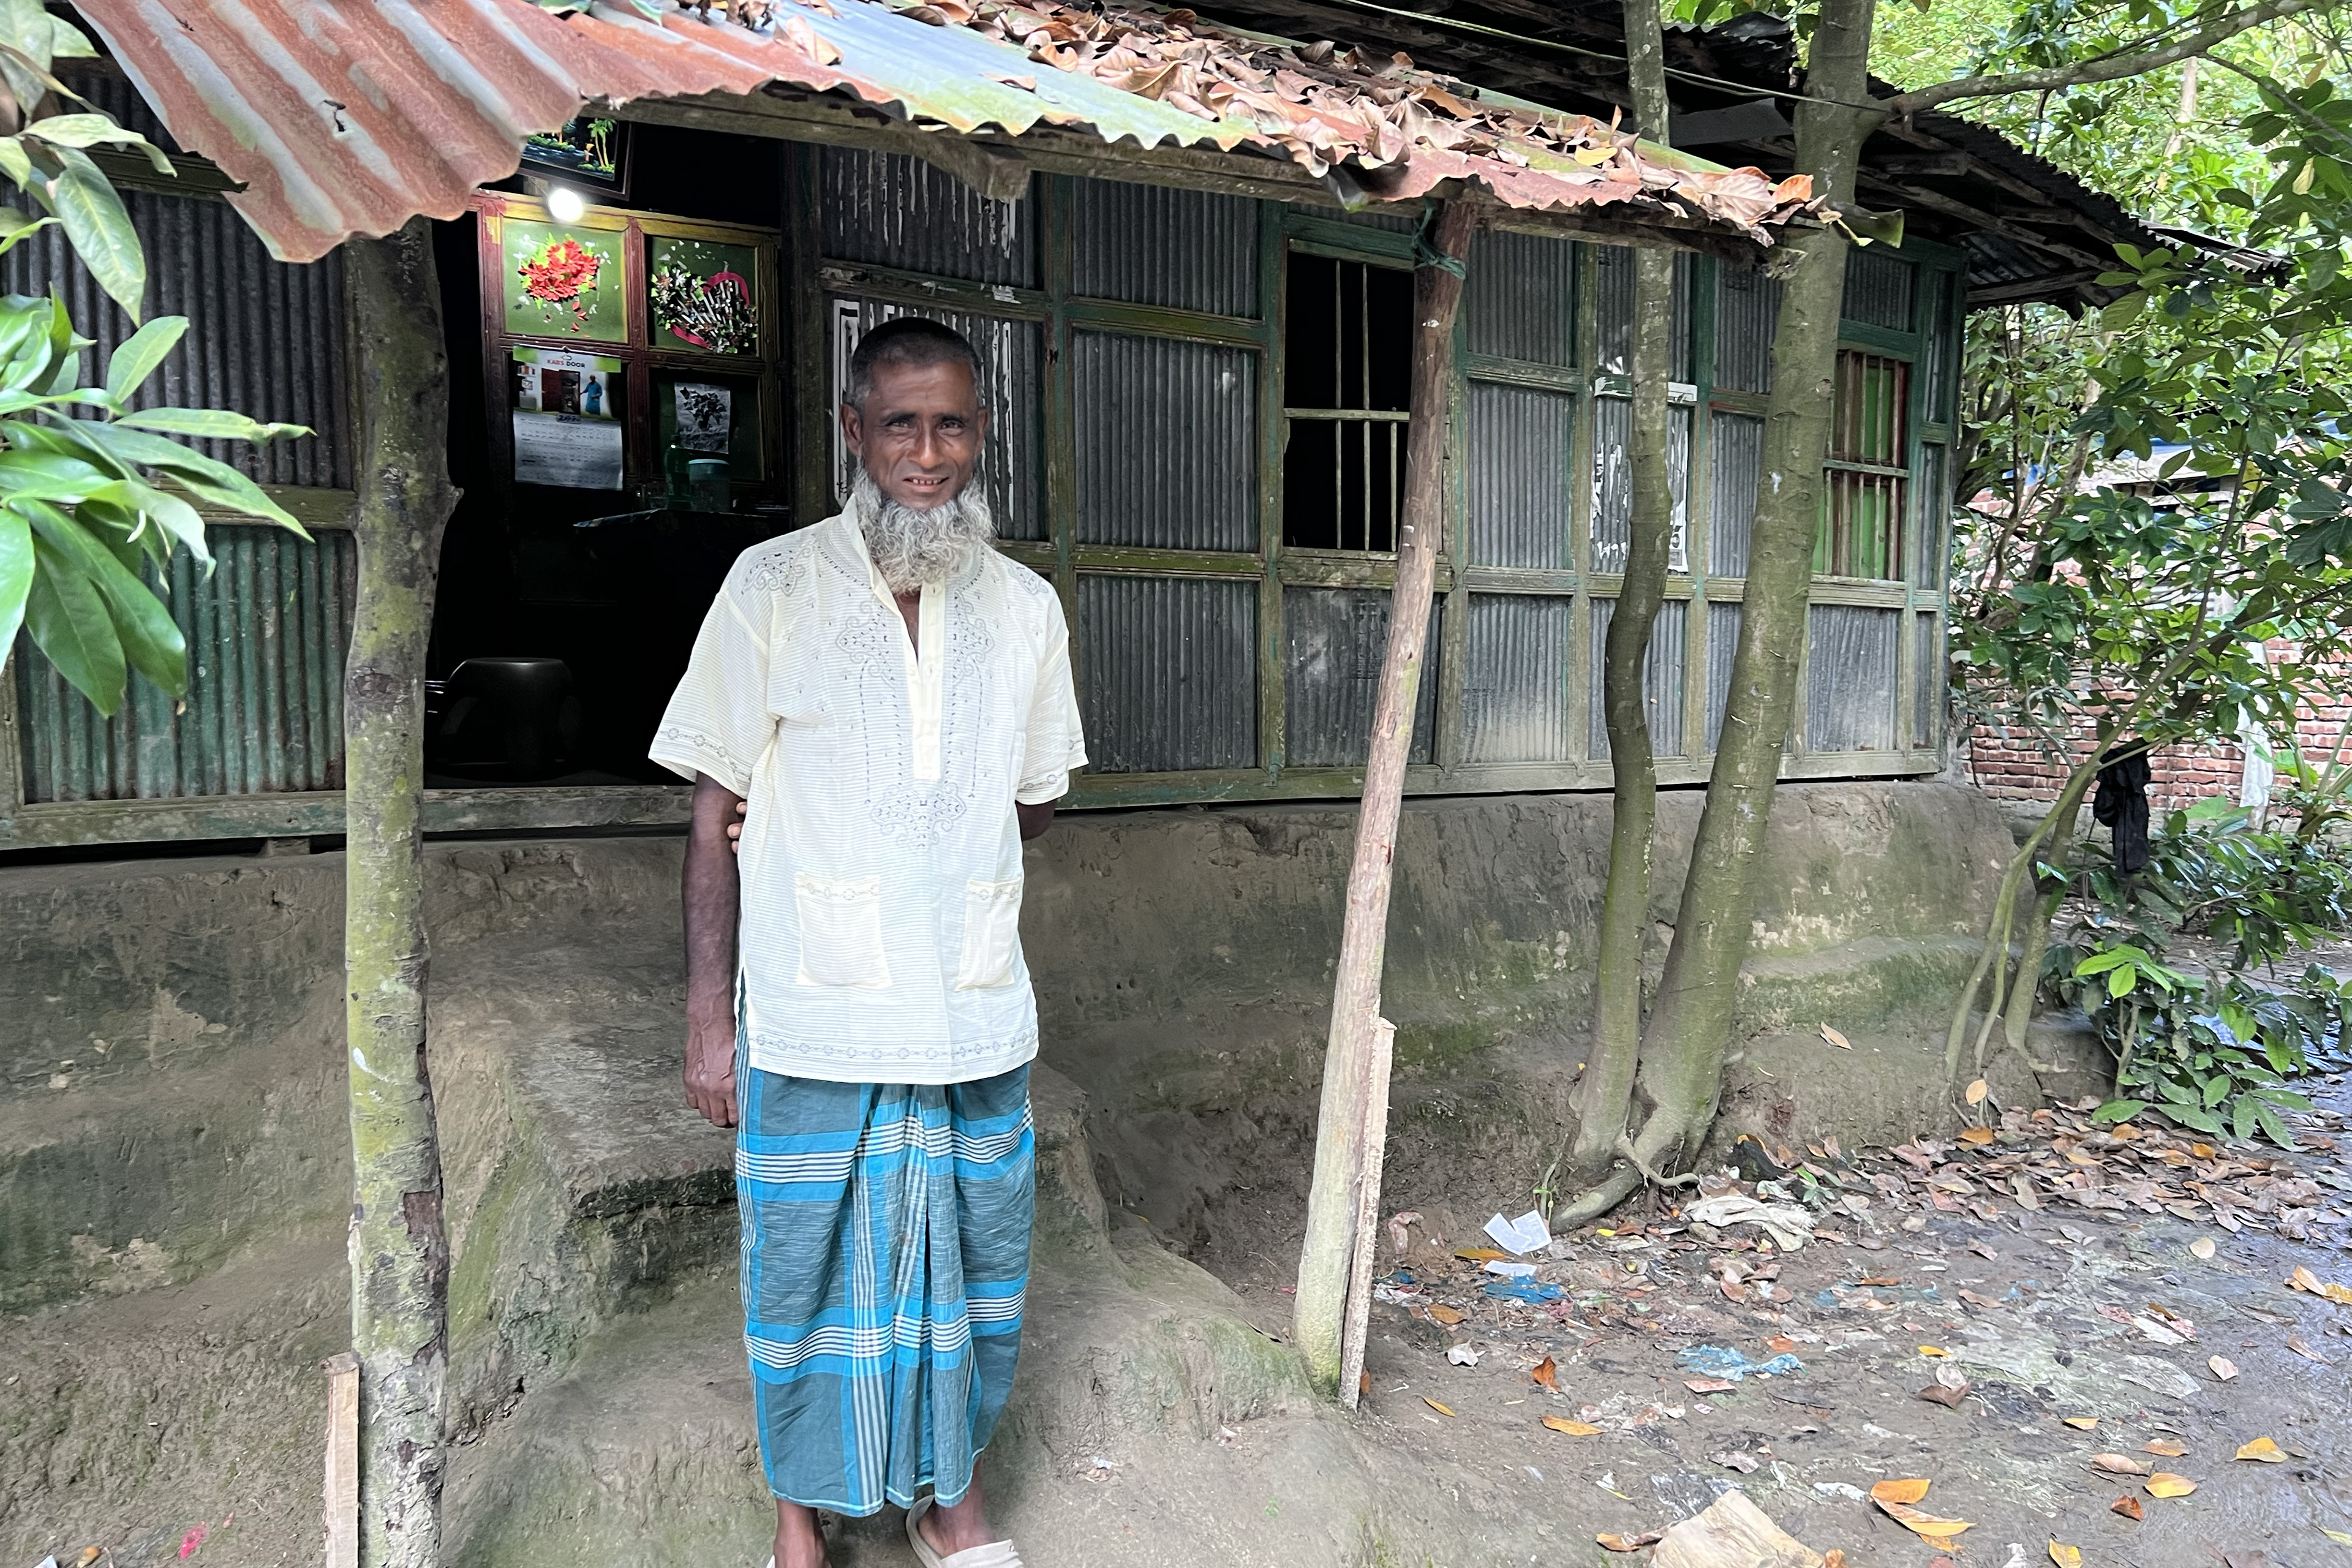 Rahima Banu’s husband stands in front of their home in August 2022. He has a long beard, mostly gray, and wears a daffodil-yellow short-sleeved shirt with a sky-blue garment beneath it. The house is made from bamboo and corrugated metal. The mud stairs that lead inside are dotted with moss.